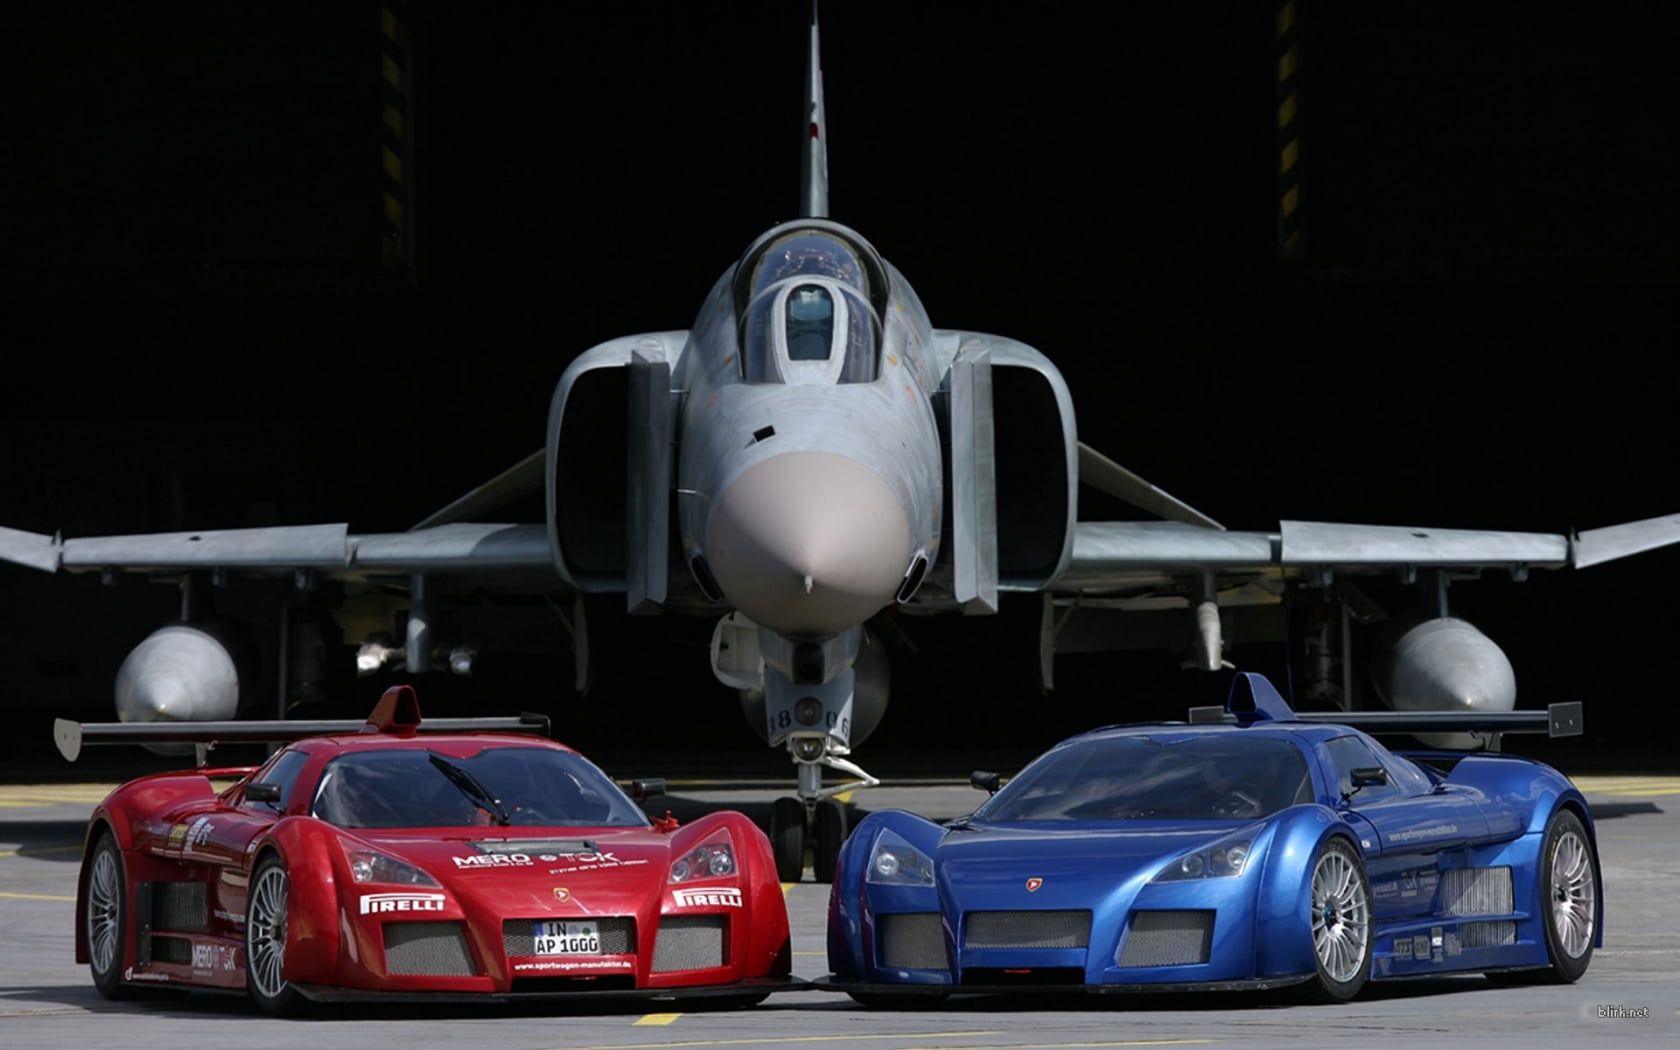 Gumpert Apollo, two red and blue sports cars, Aircrafts / Planes